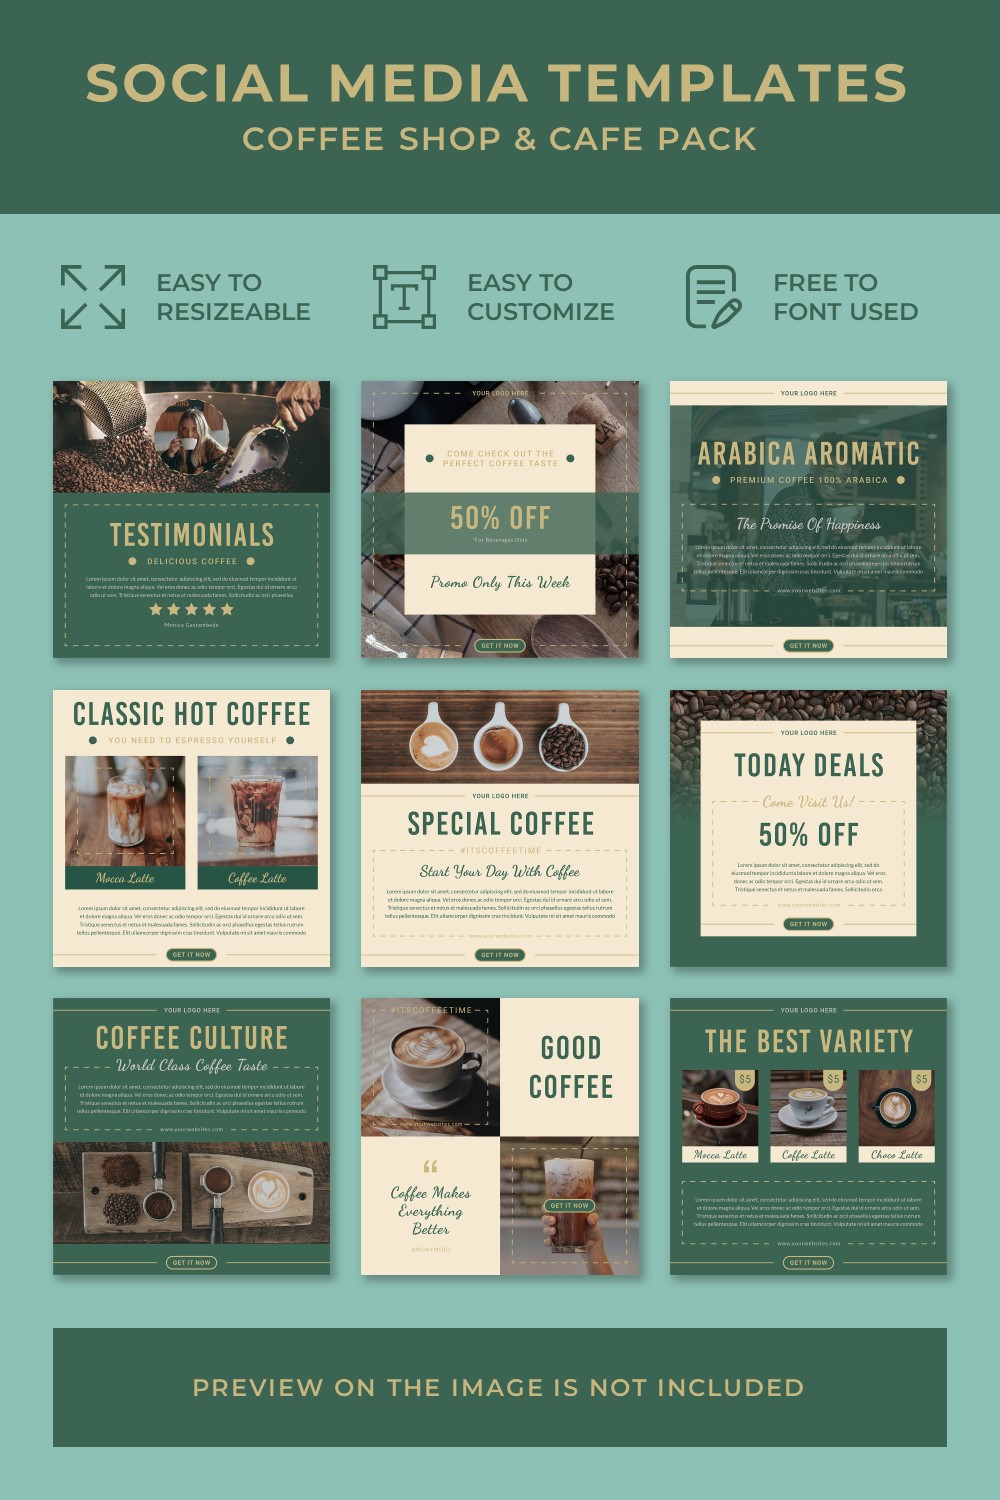 Pinterest collage image with Coffee Shop & Cafe Pack Social Media Post Templates.